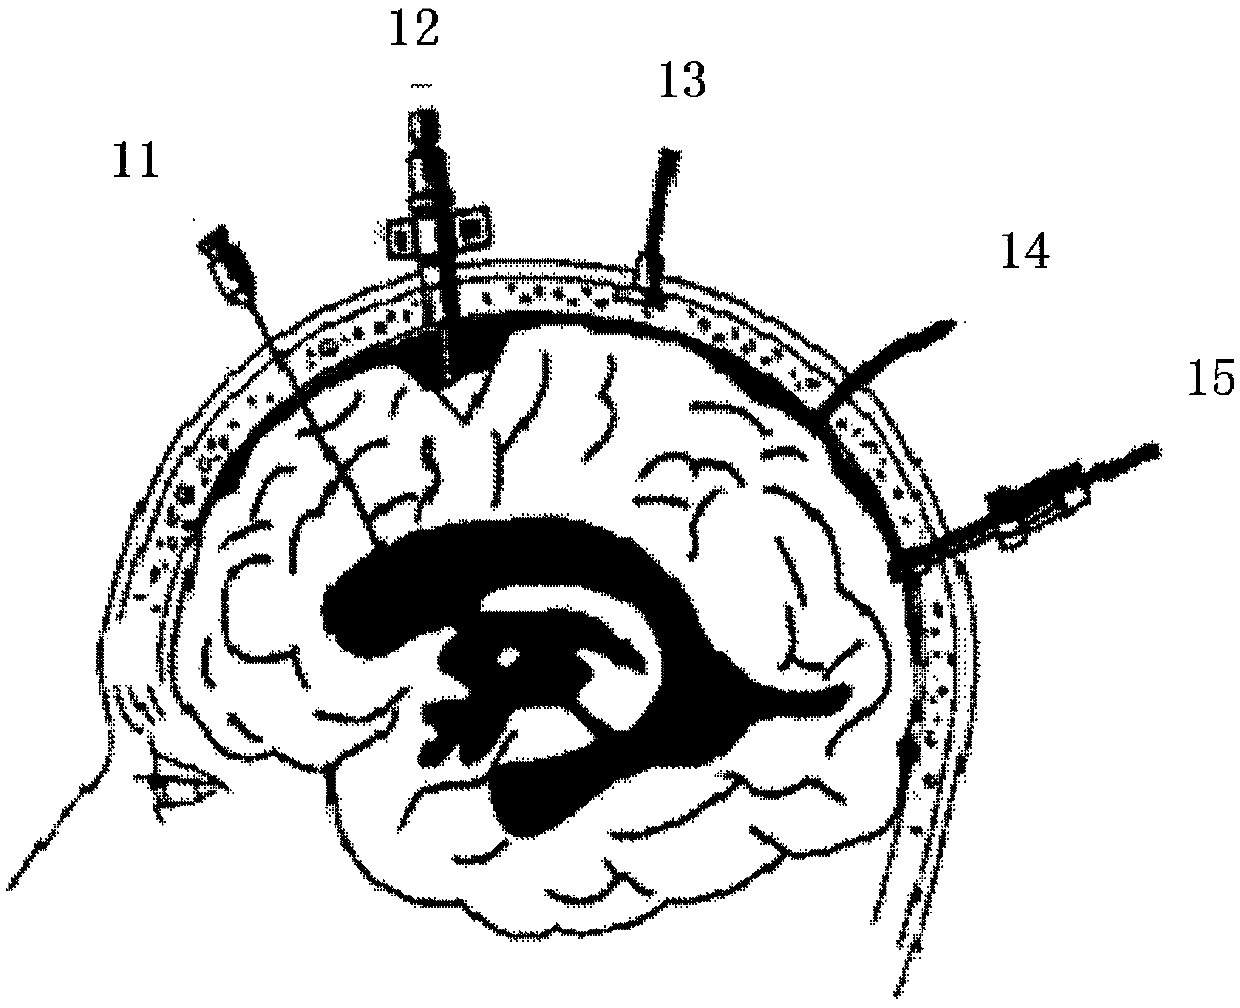 An implantable wireless passive intracranial pressure monitoring system